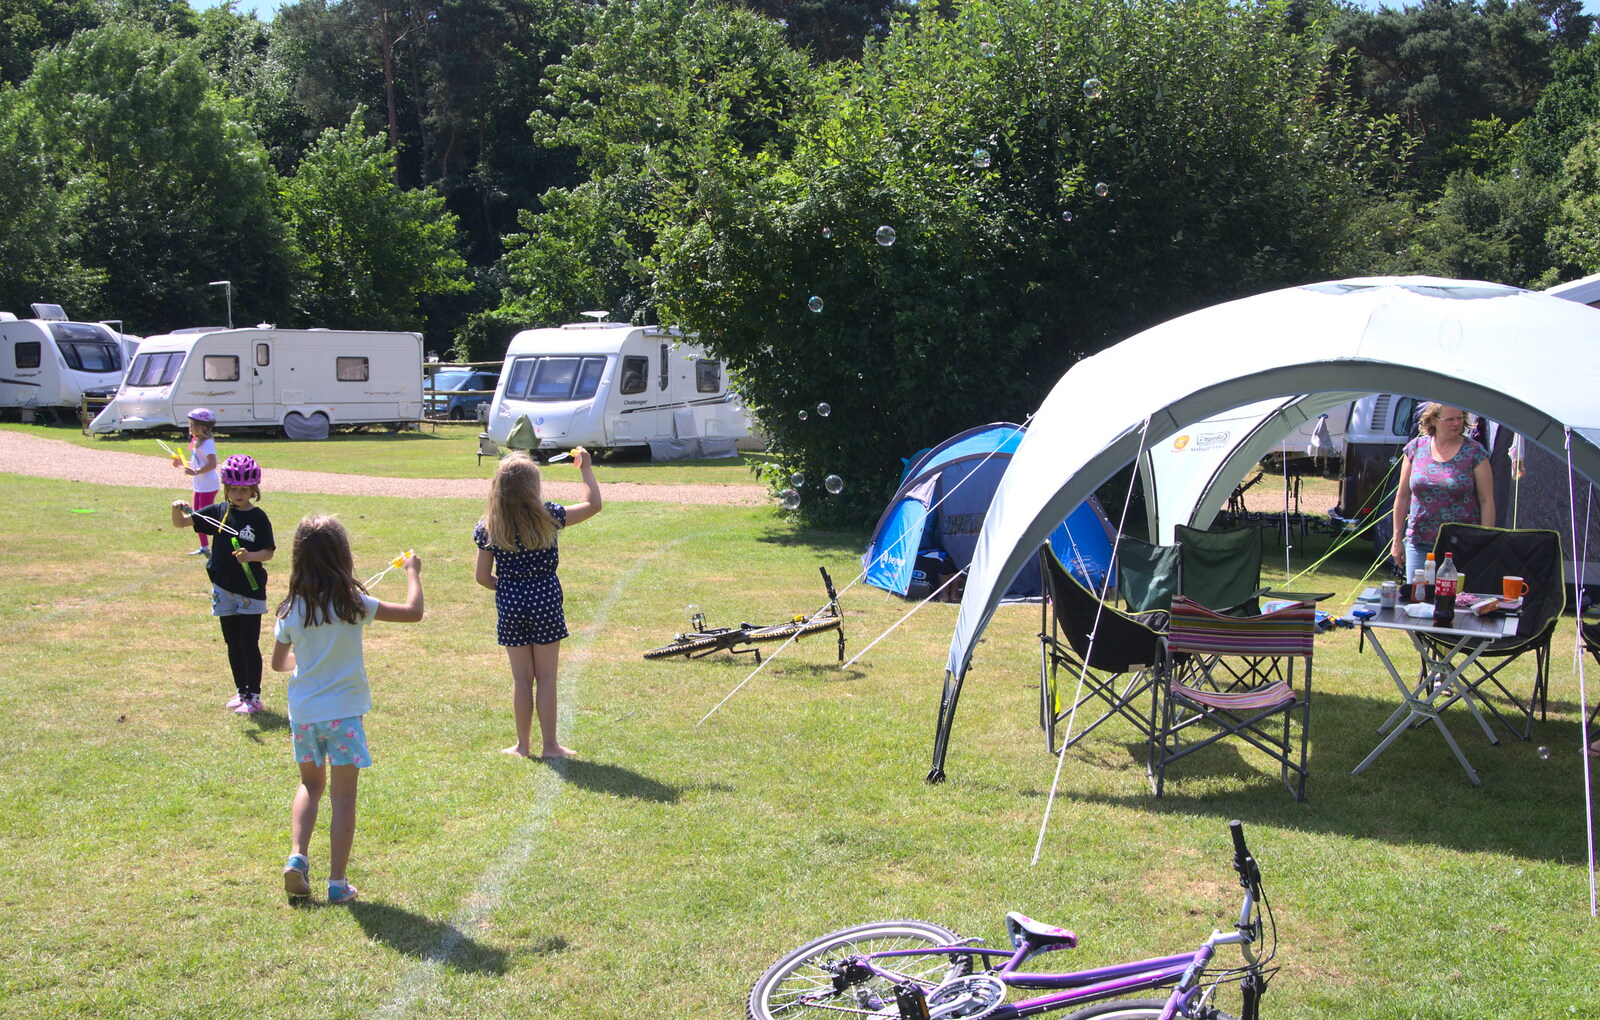 Everyone's got bubbles going from Camping at Dower House, West Harling, Norfolk - 1st July 2017